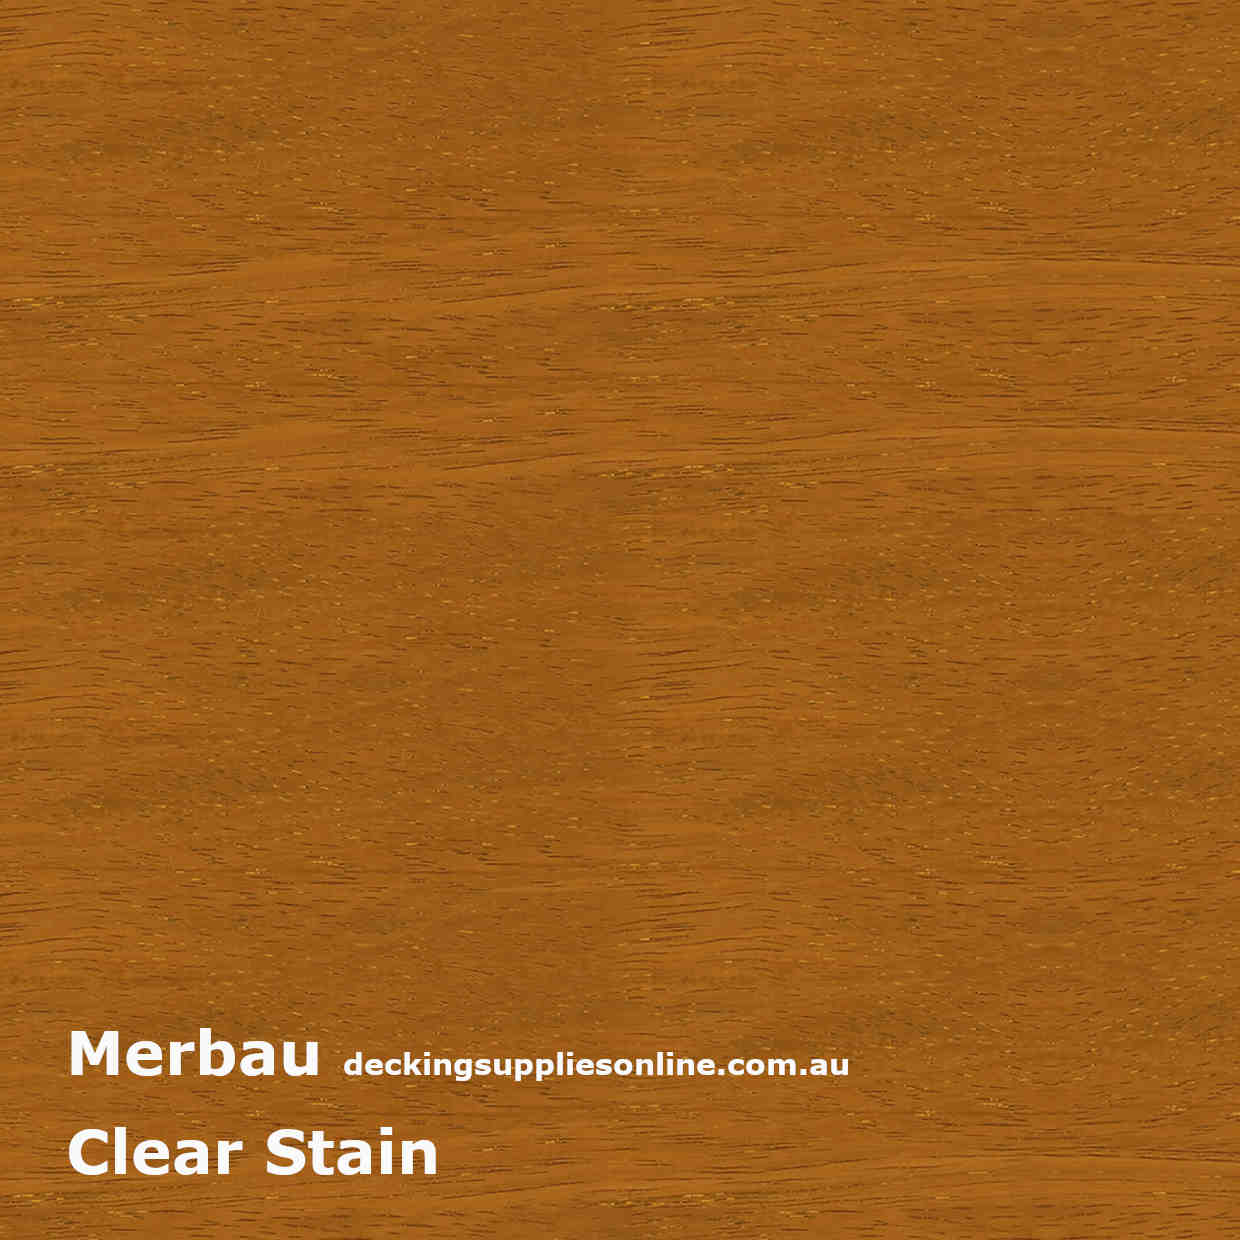 Intergrain_Nature_s_Timber_Swatch_Clear_StainIntergrain_Nature_s_Timber_Swatch_Clear_Stain_Decking_Supplies_Online